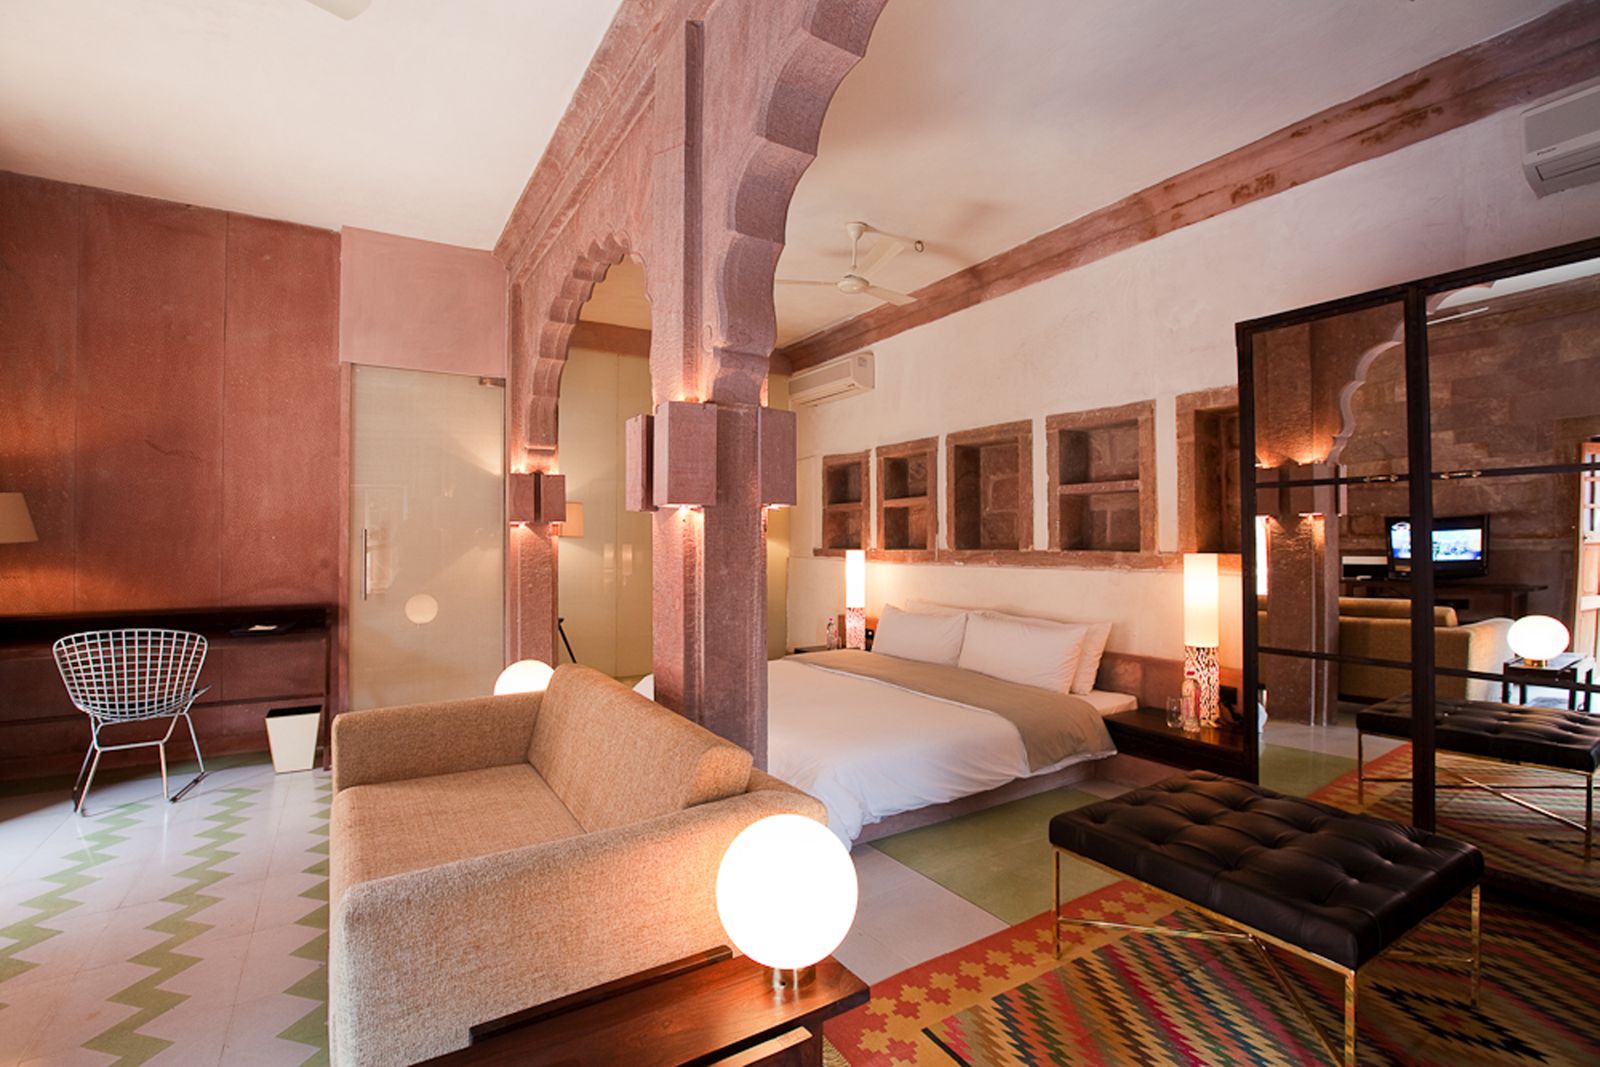 Heritage Suite at the RAAS Jodhpur hotel in India